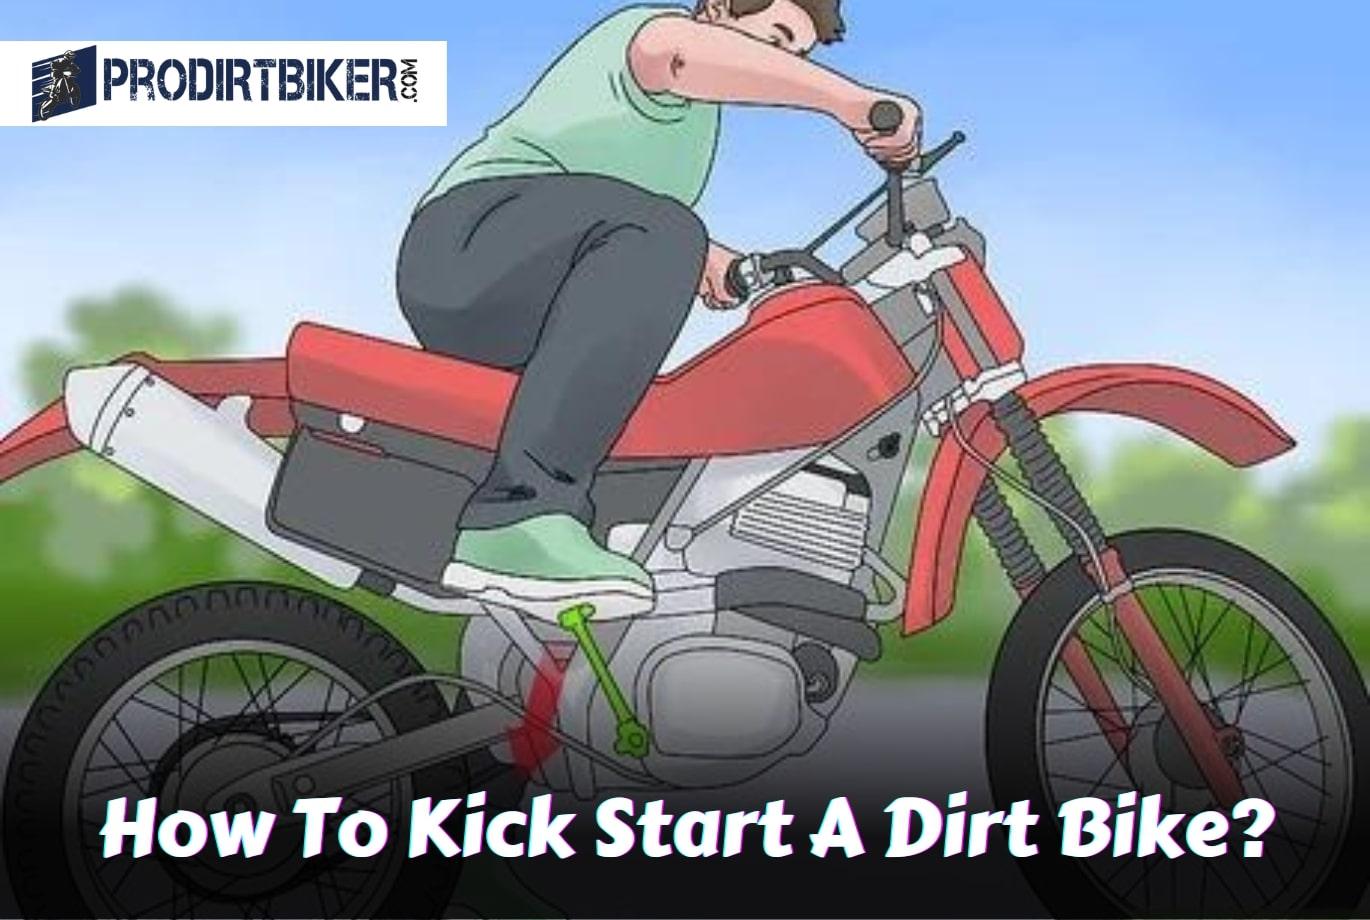 How To Kick Start A Dirt Bike? Quick and Easy Tips